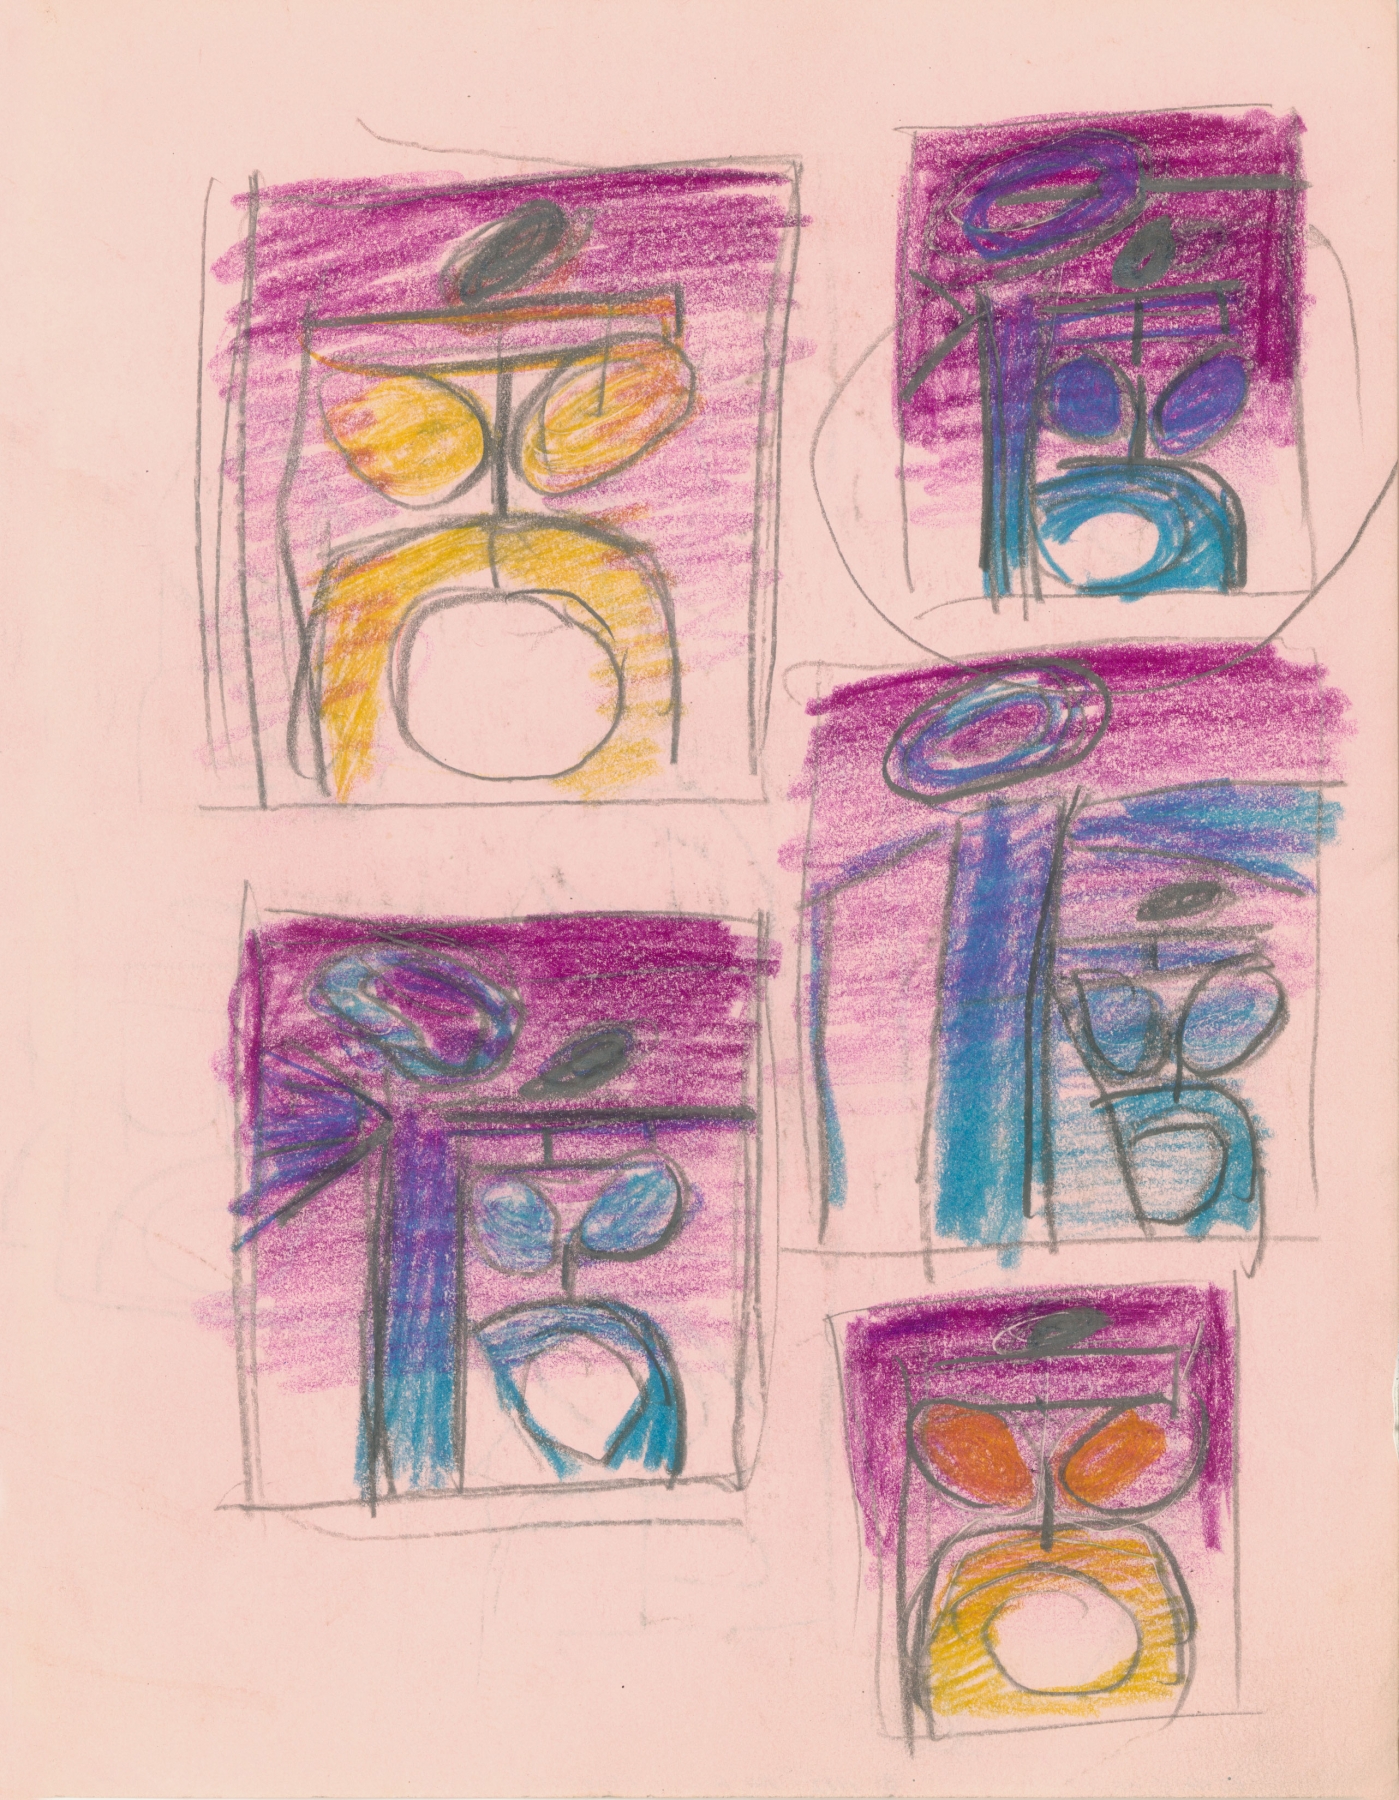 Untitled, C 30, c.1970s
Graphite and Crayon
H: 11 x W: 8.5 inches

&nbsp;